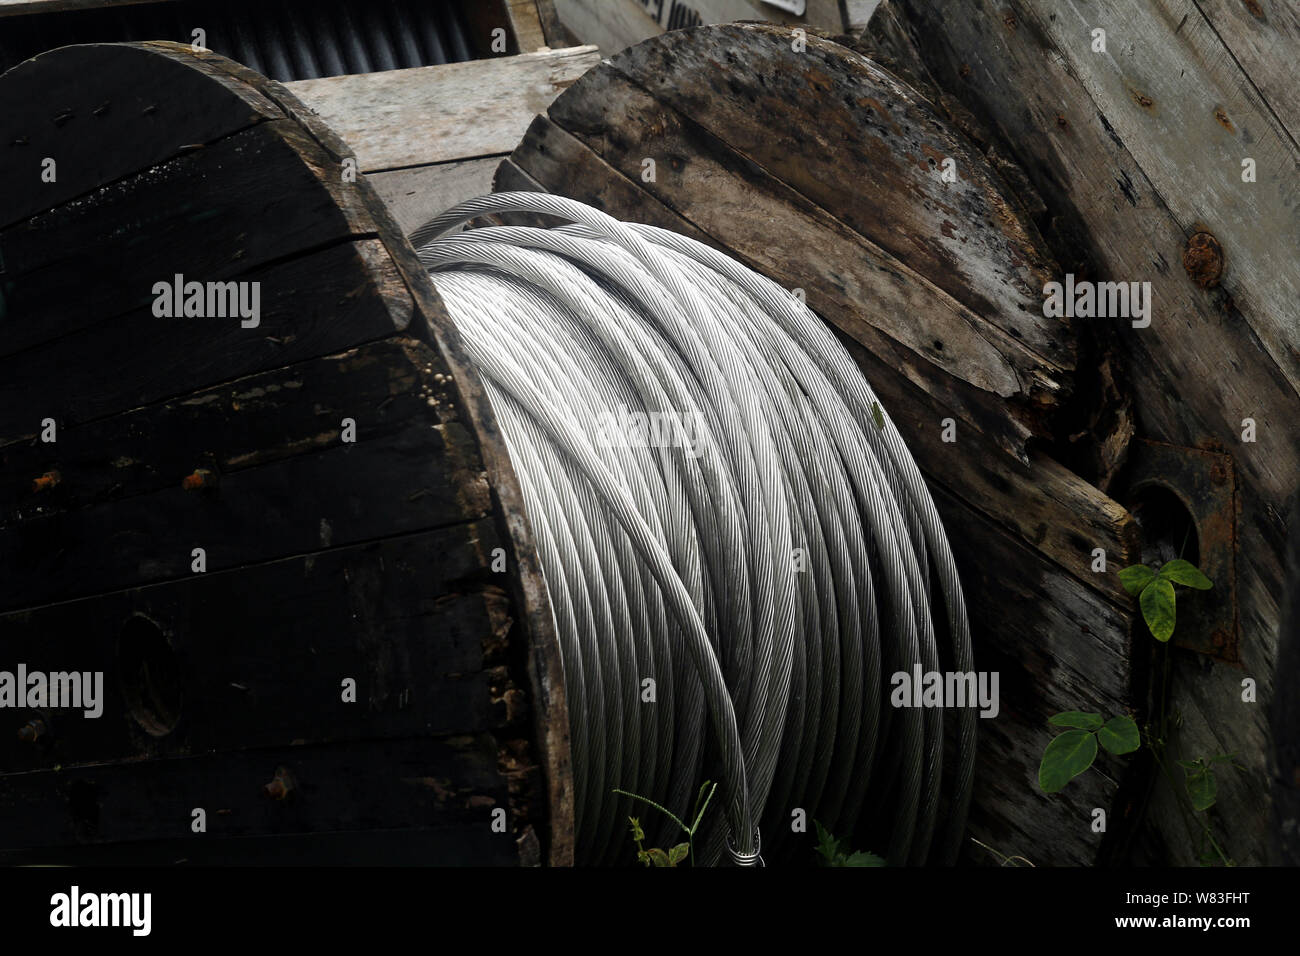 Photo of rolls of metal or steel cables used for electric poles at an industrial yard Stock Photo